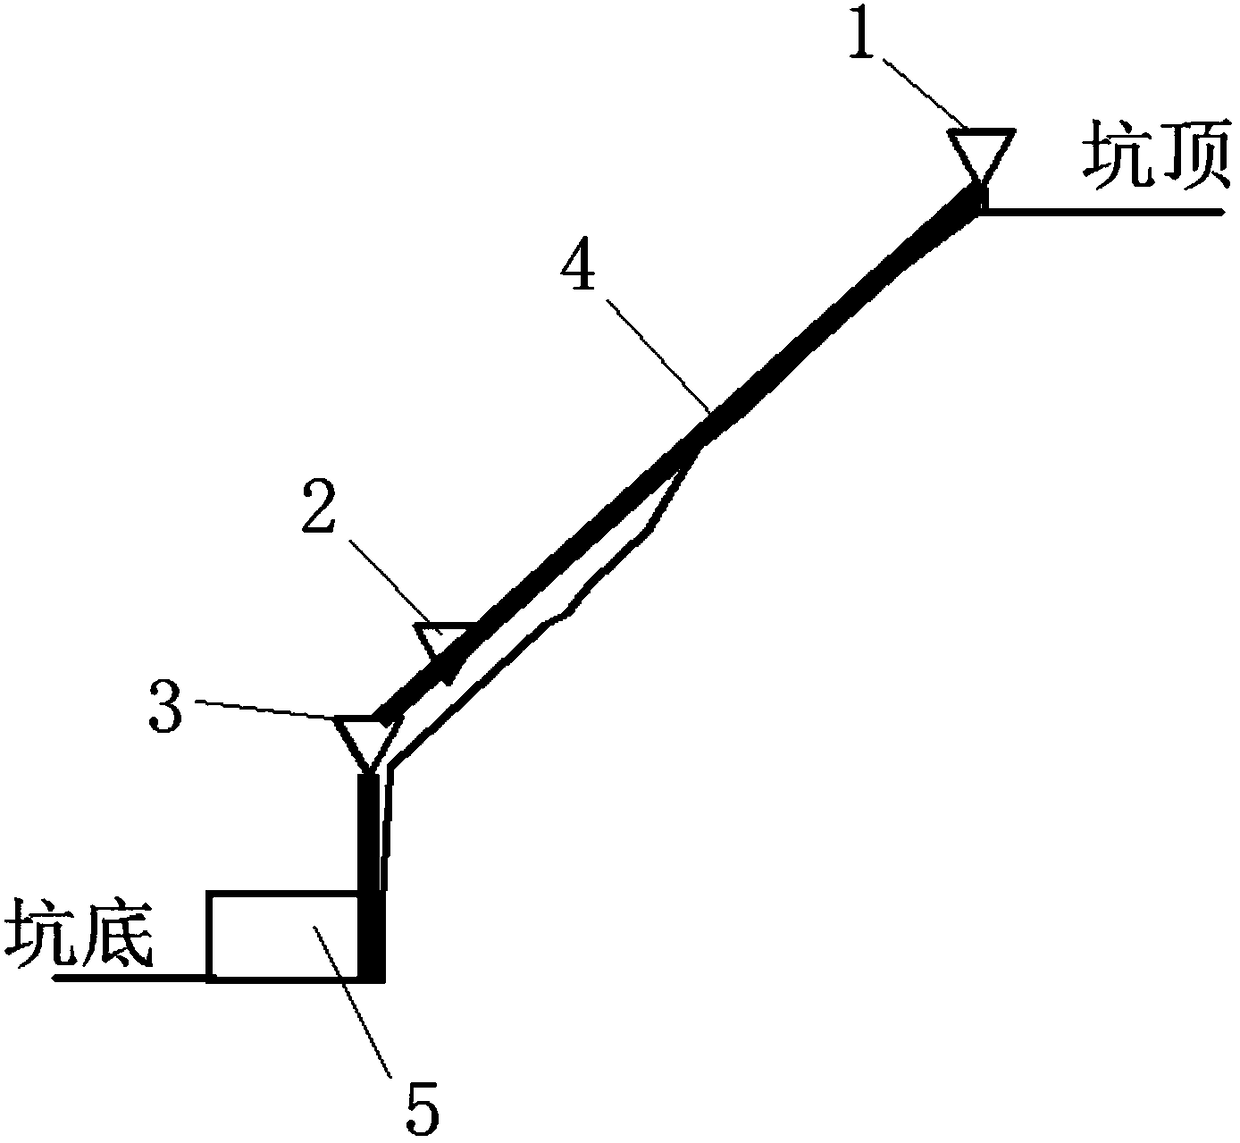 Construction method of conveying concrete downwards with large drop